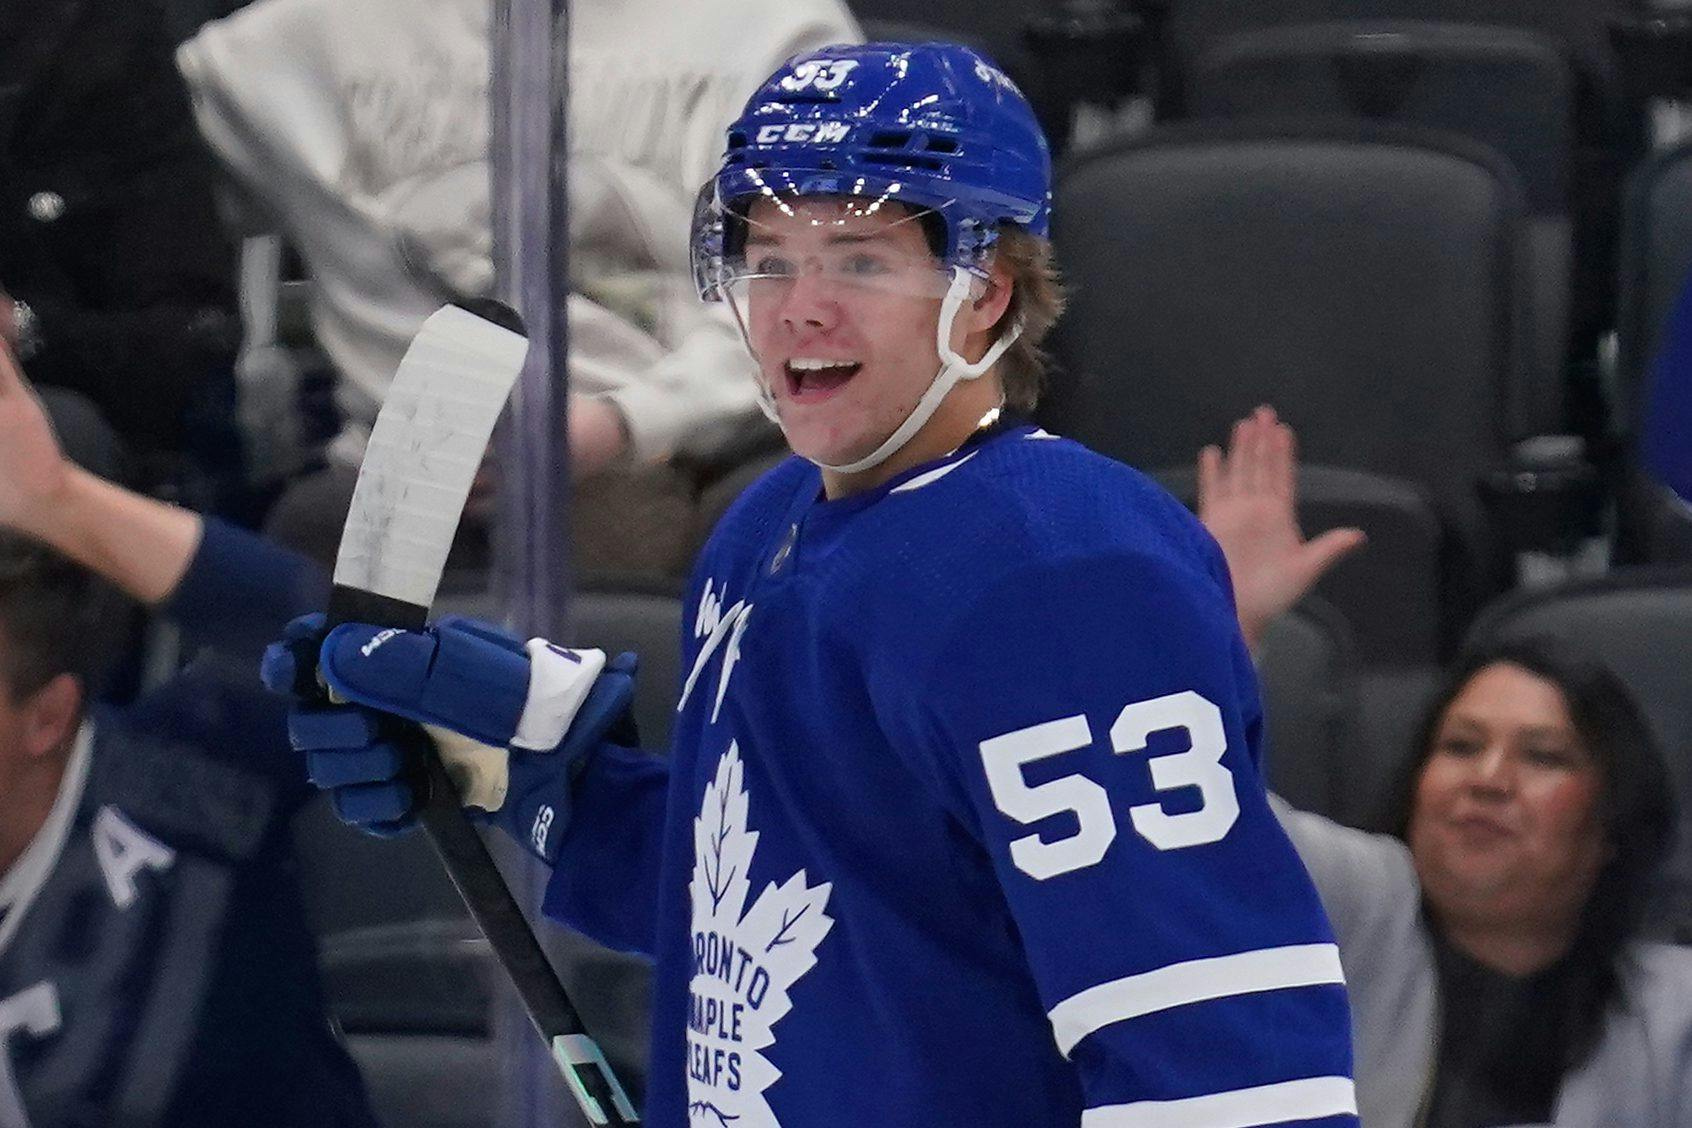 Toronto Maple Leafs prospect Easton Cowan is proving doubters wrong